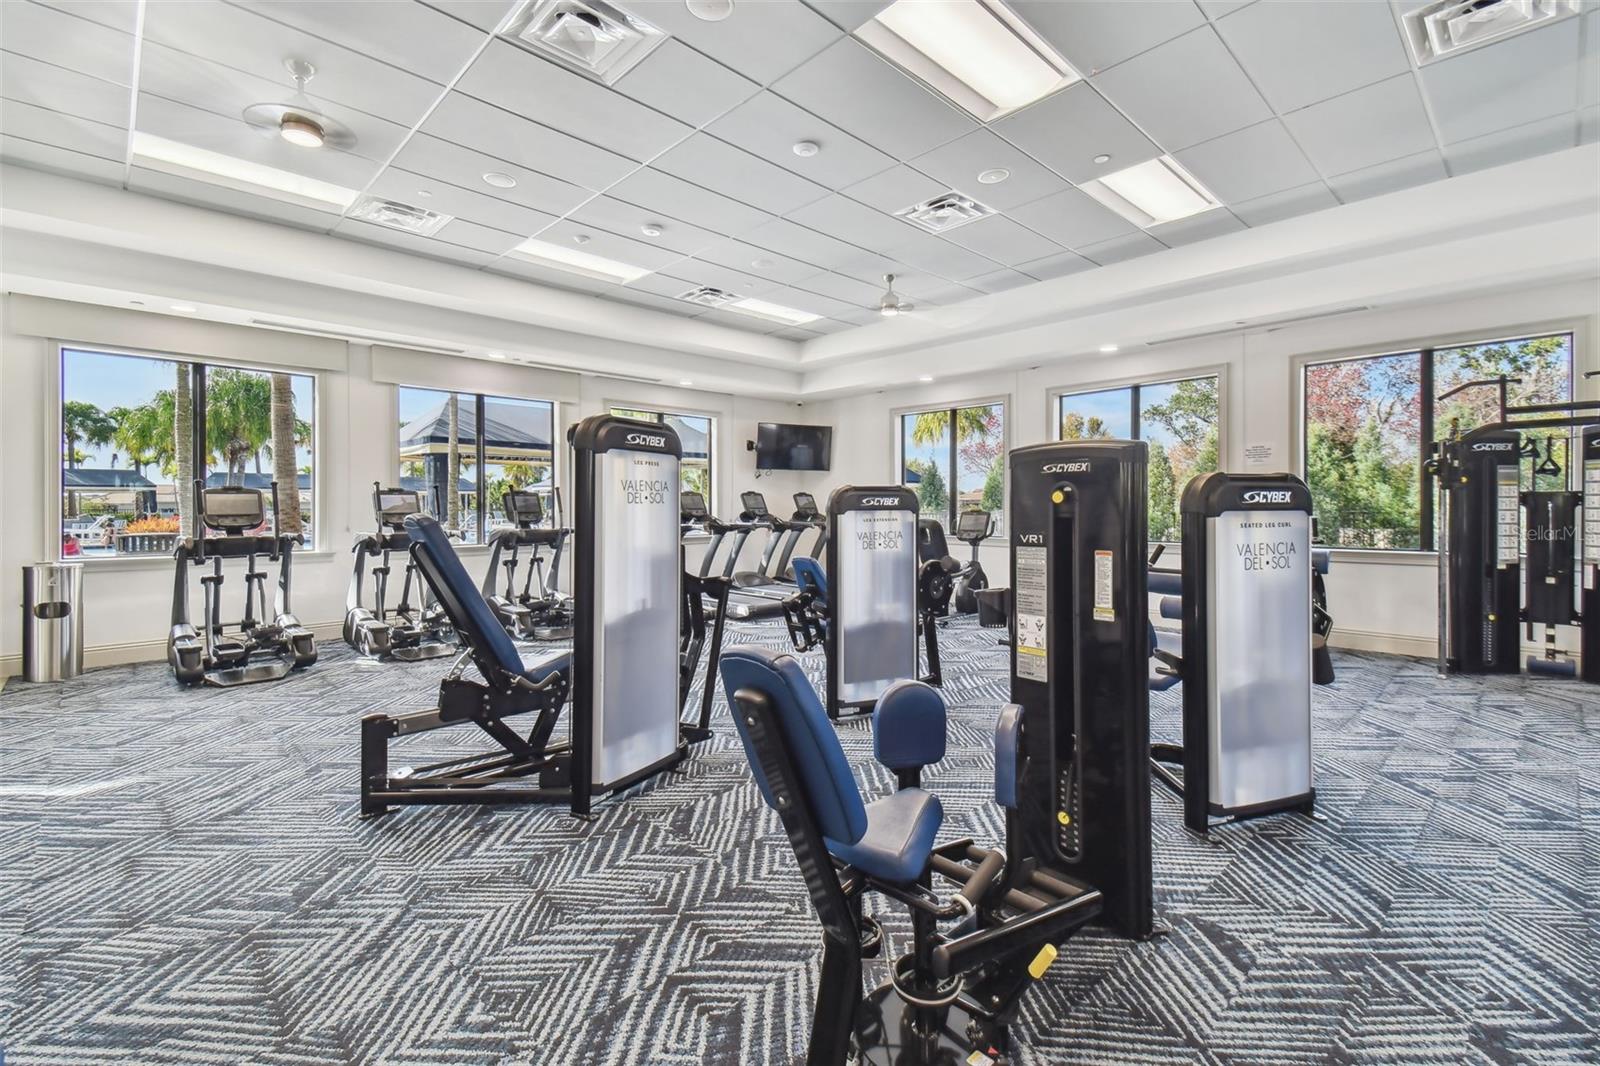 Fitness center as well as exercise studio and group fitness classes.